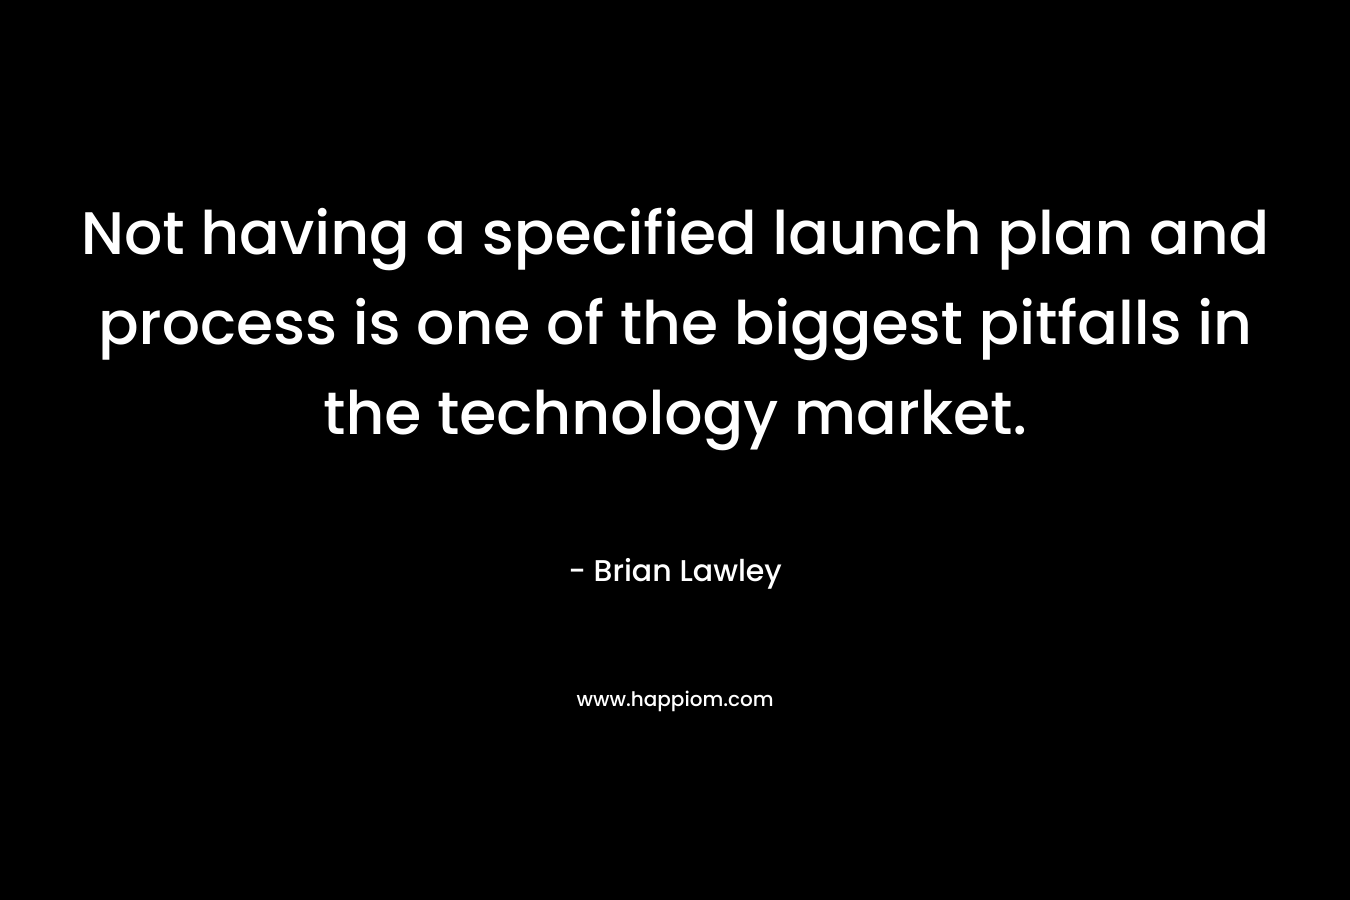 Not having a specified launch plan and process is one of the biggest pitfalls in the technology market.